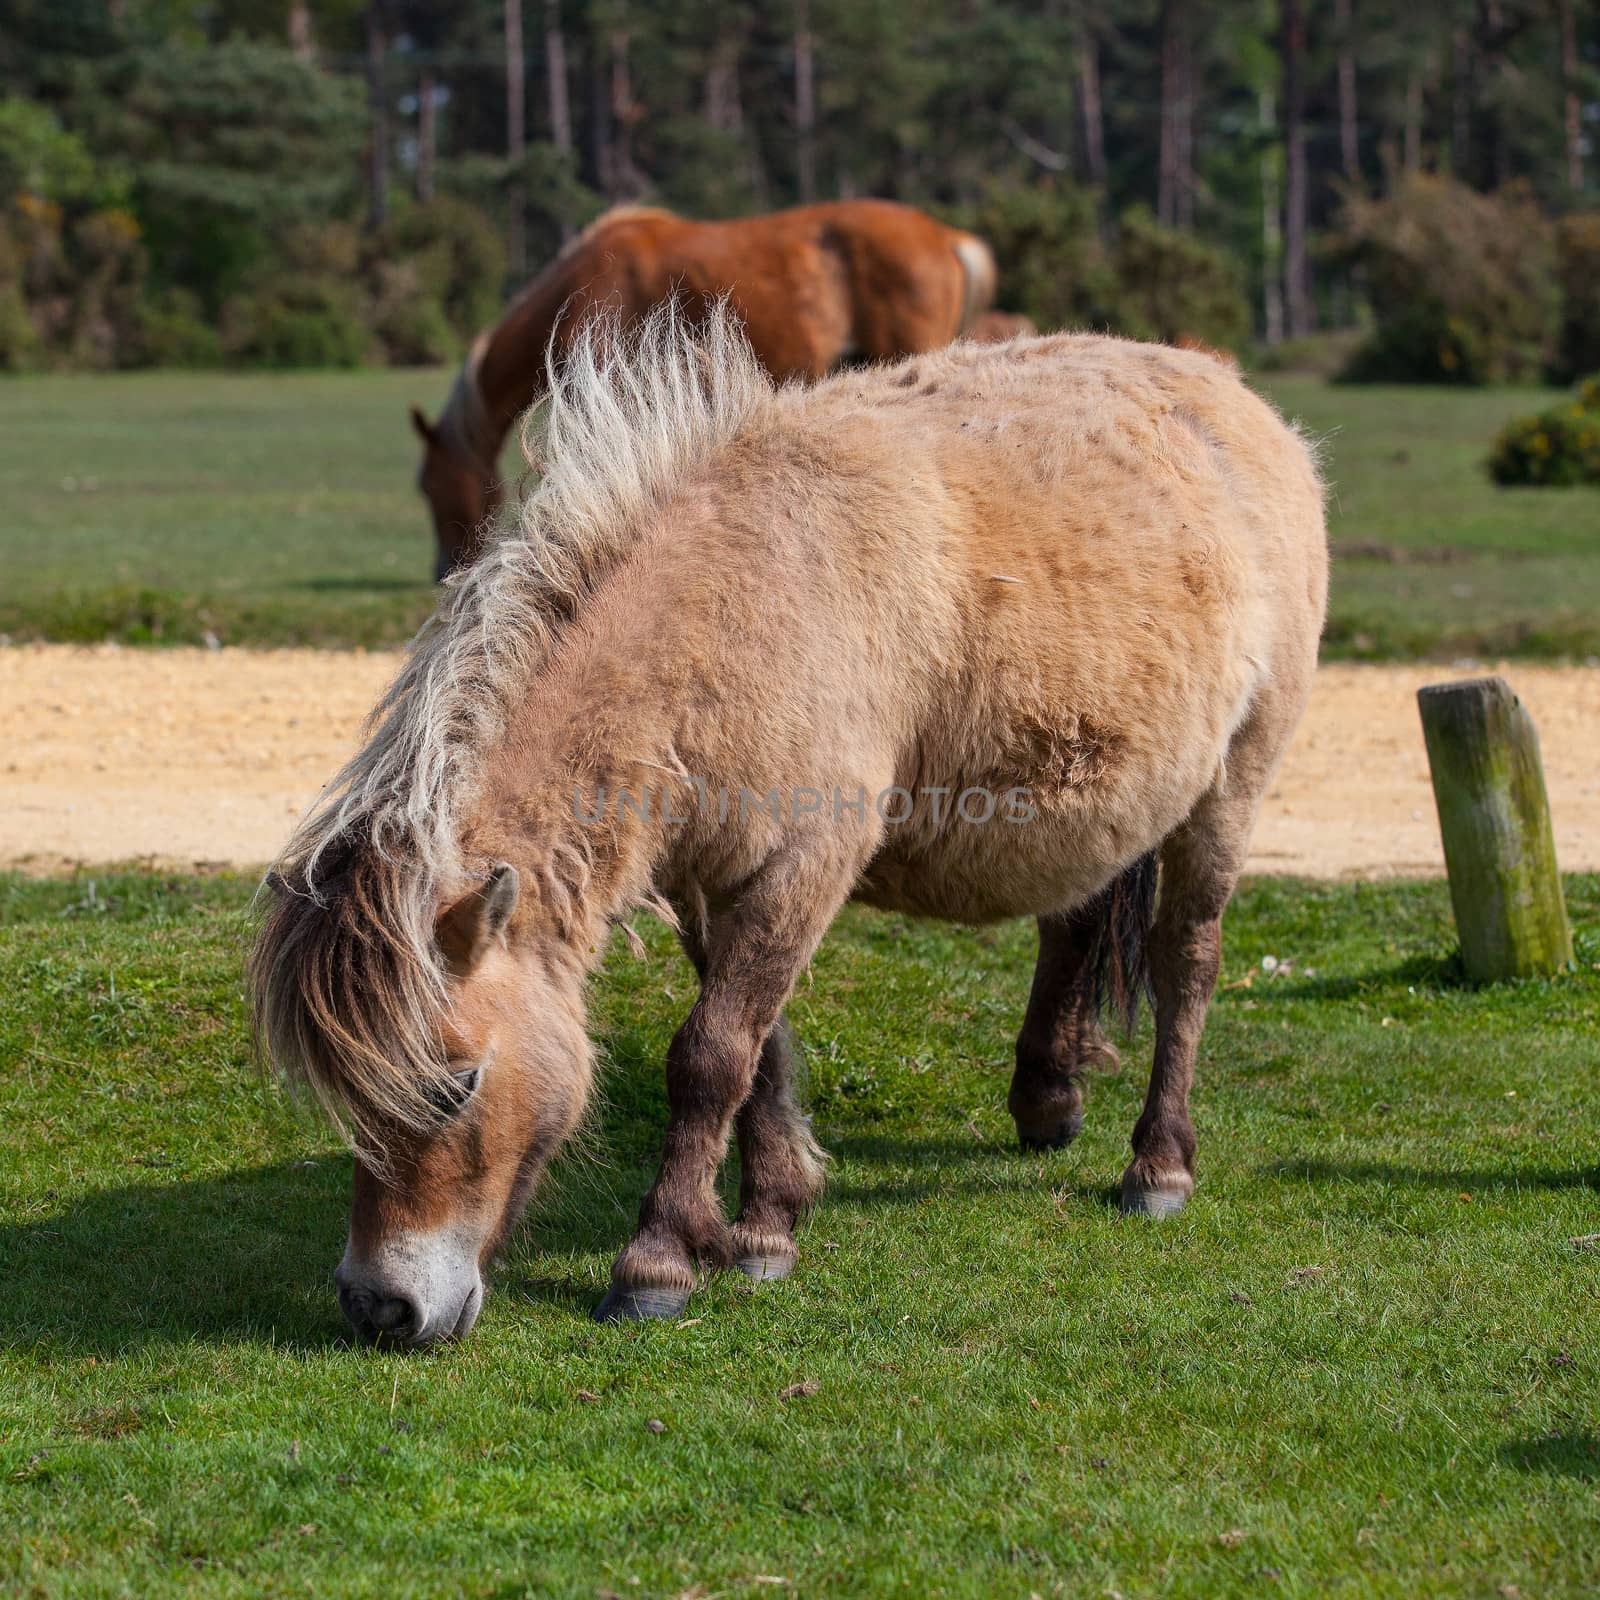 Wild pony in New Forest National Park by CaptureLight